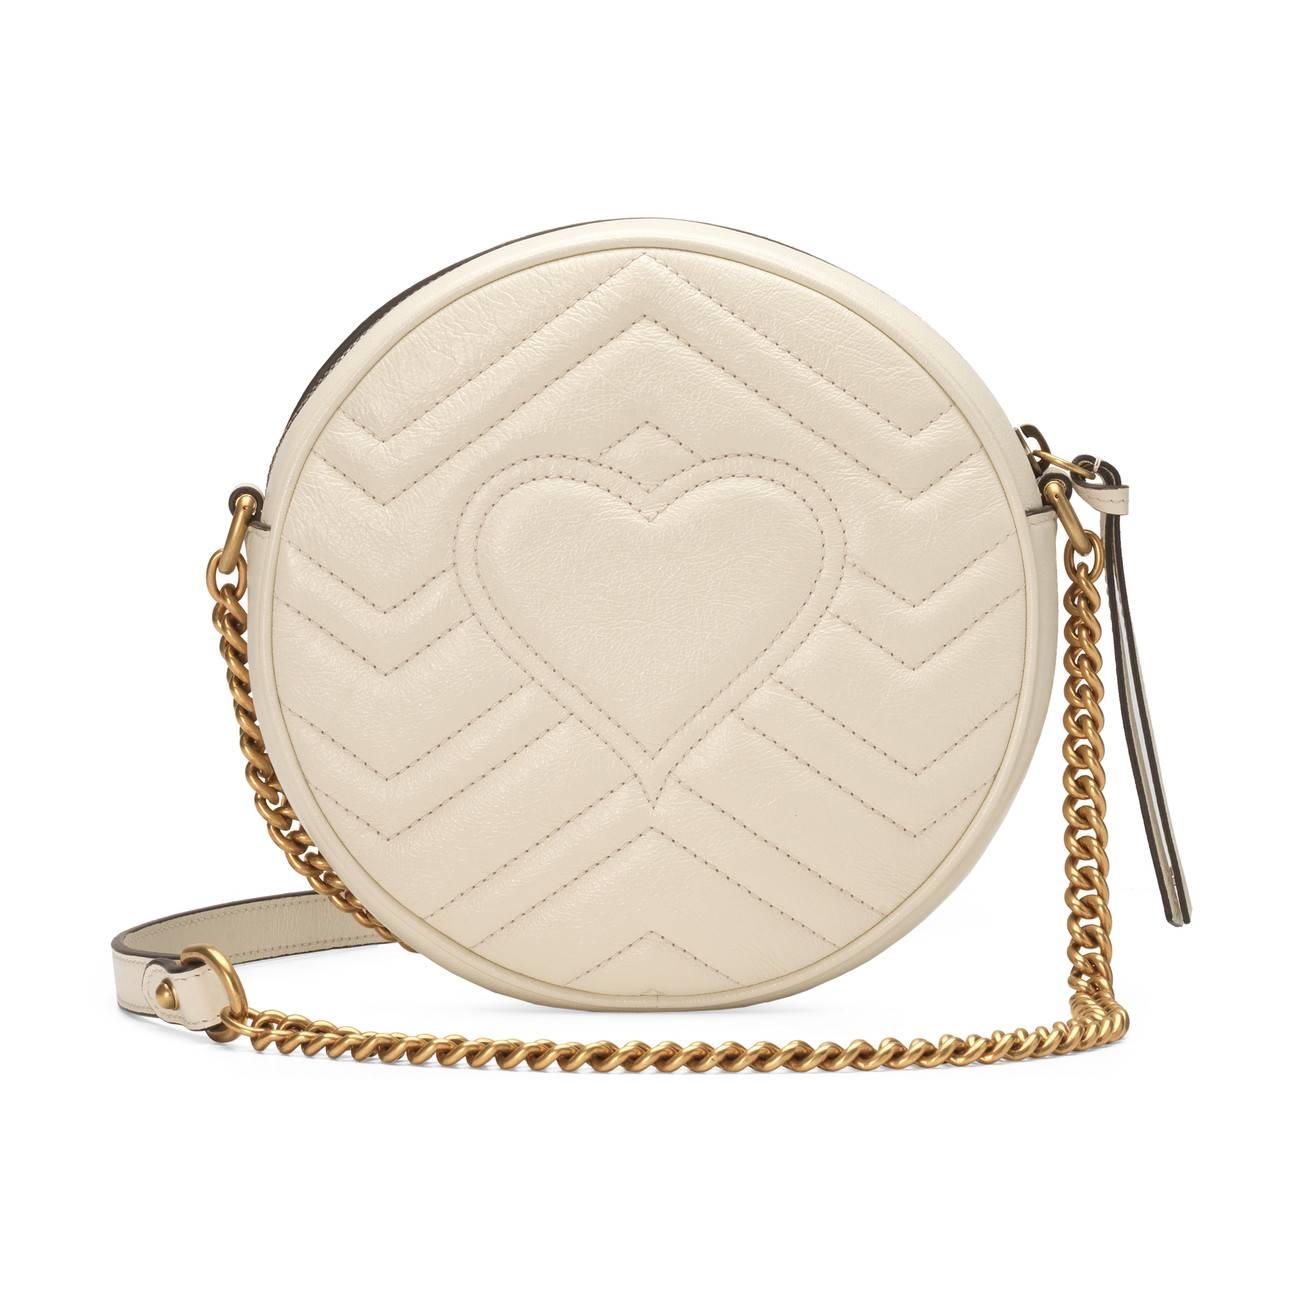 Gucci Leather GG Marmont Mini Round Shoulder Bag in White Leather (White) - Lyst